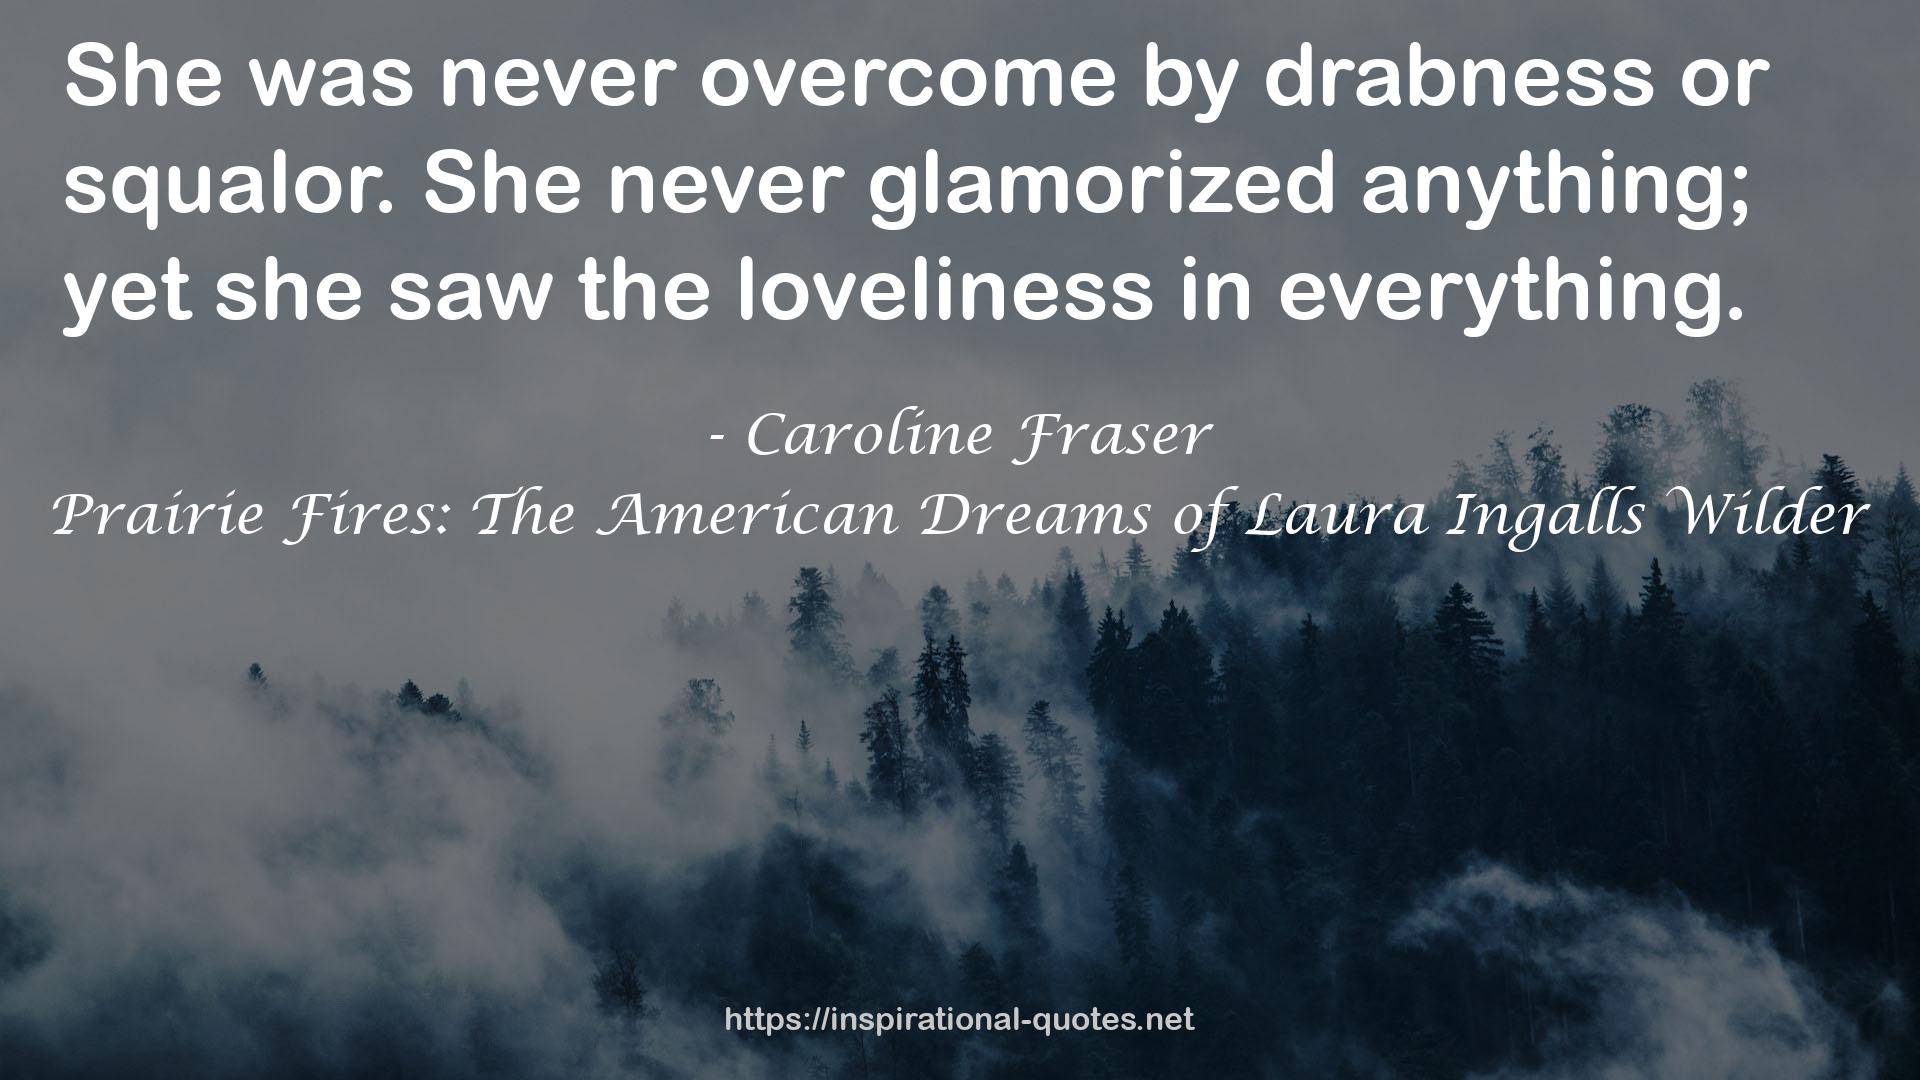 Prairie Fires: The American Dreams of Laura Ingalls Wilder QUOTES